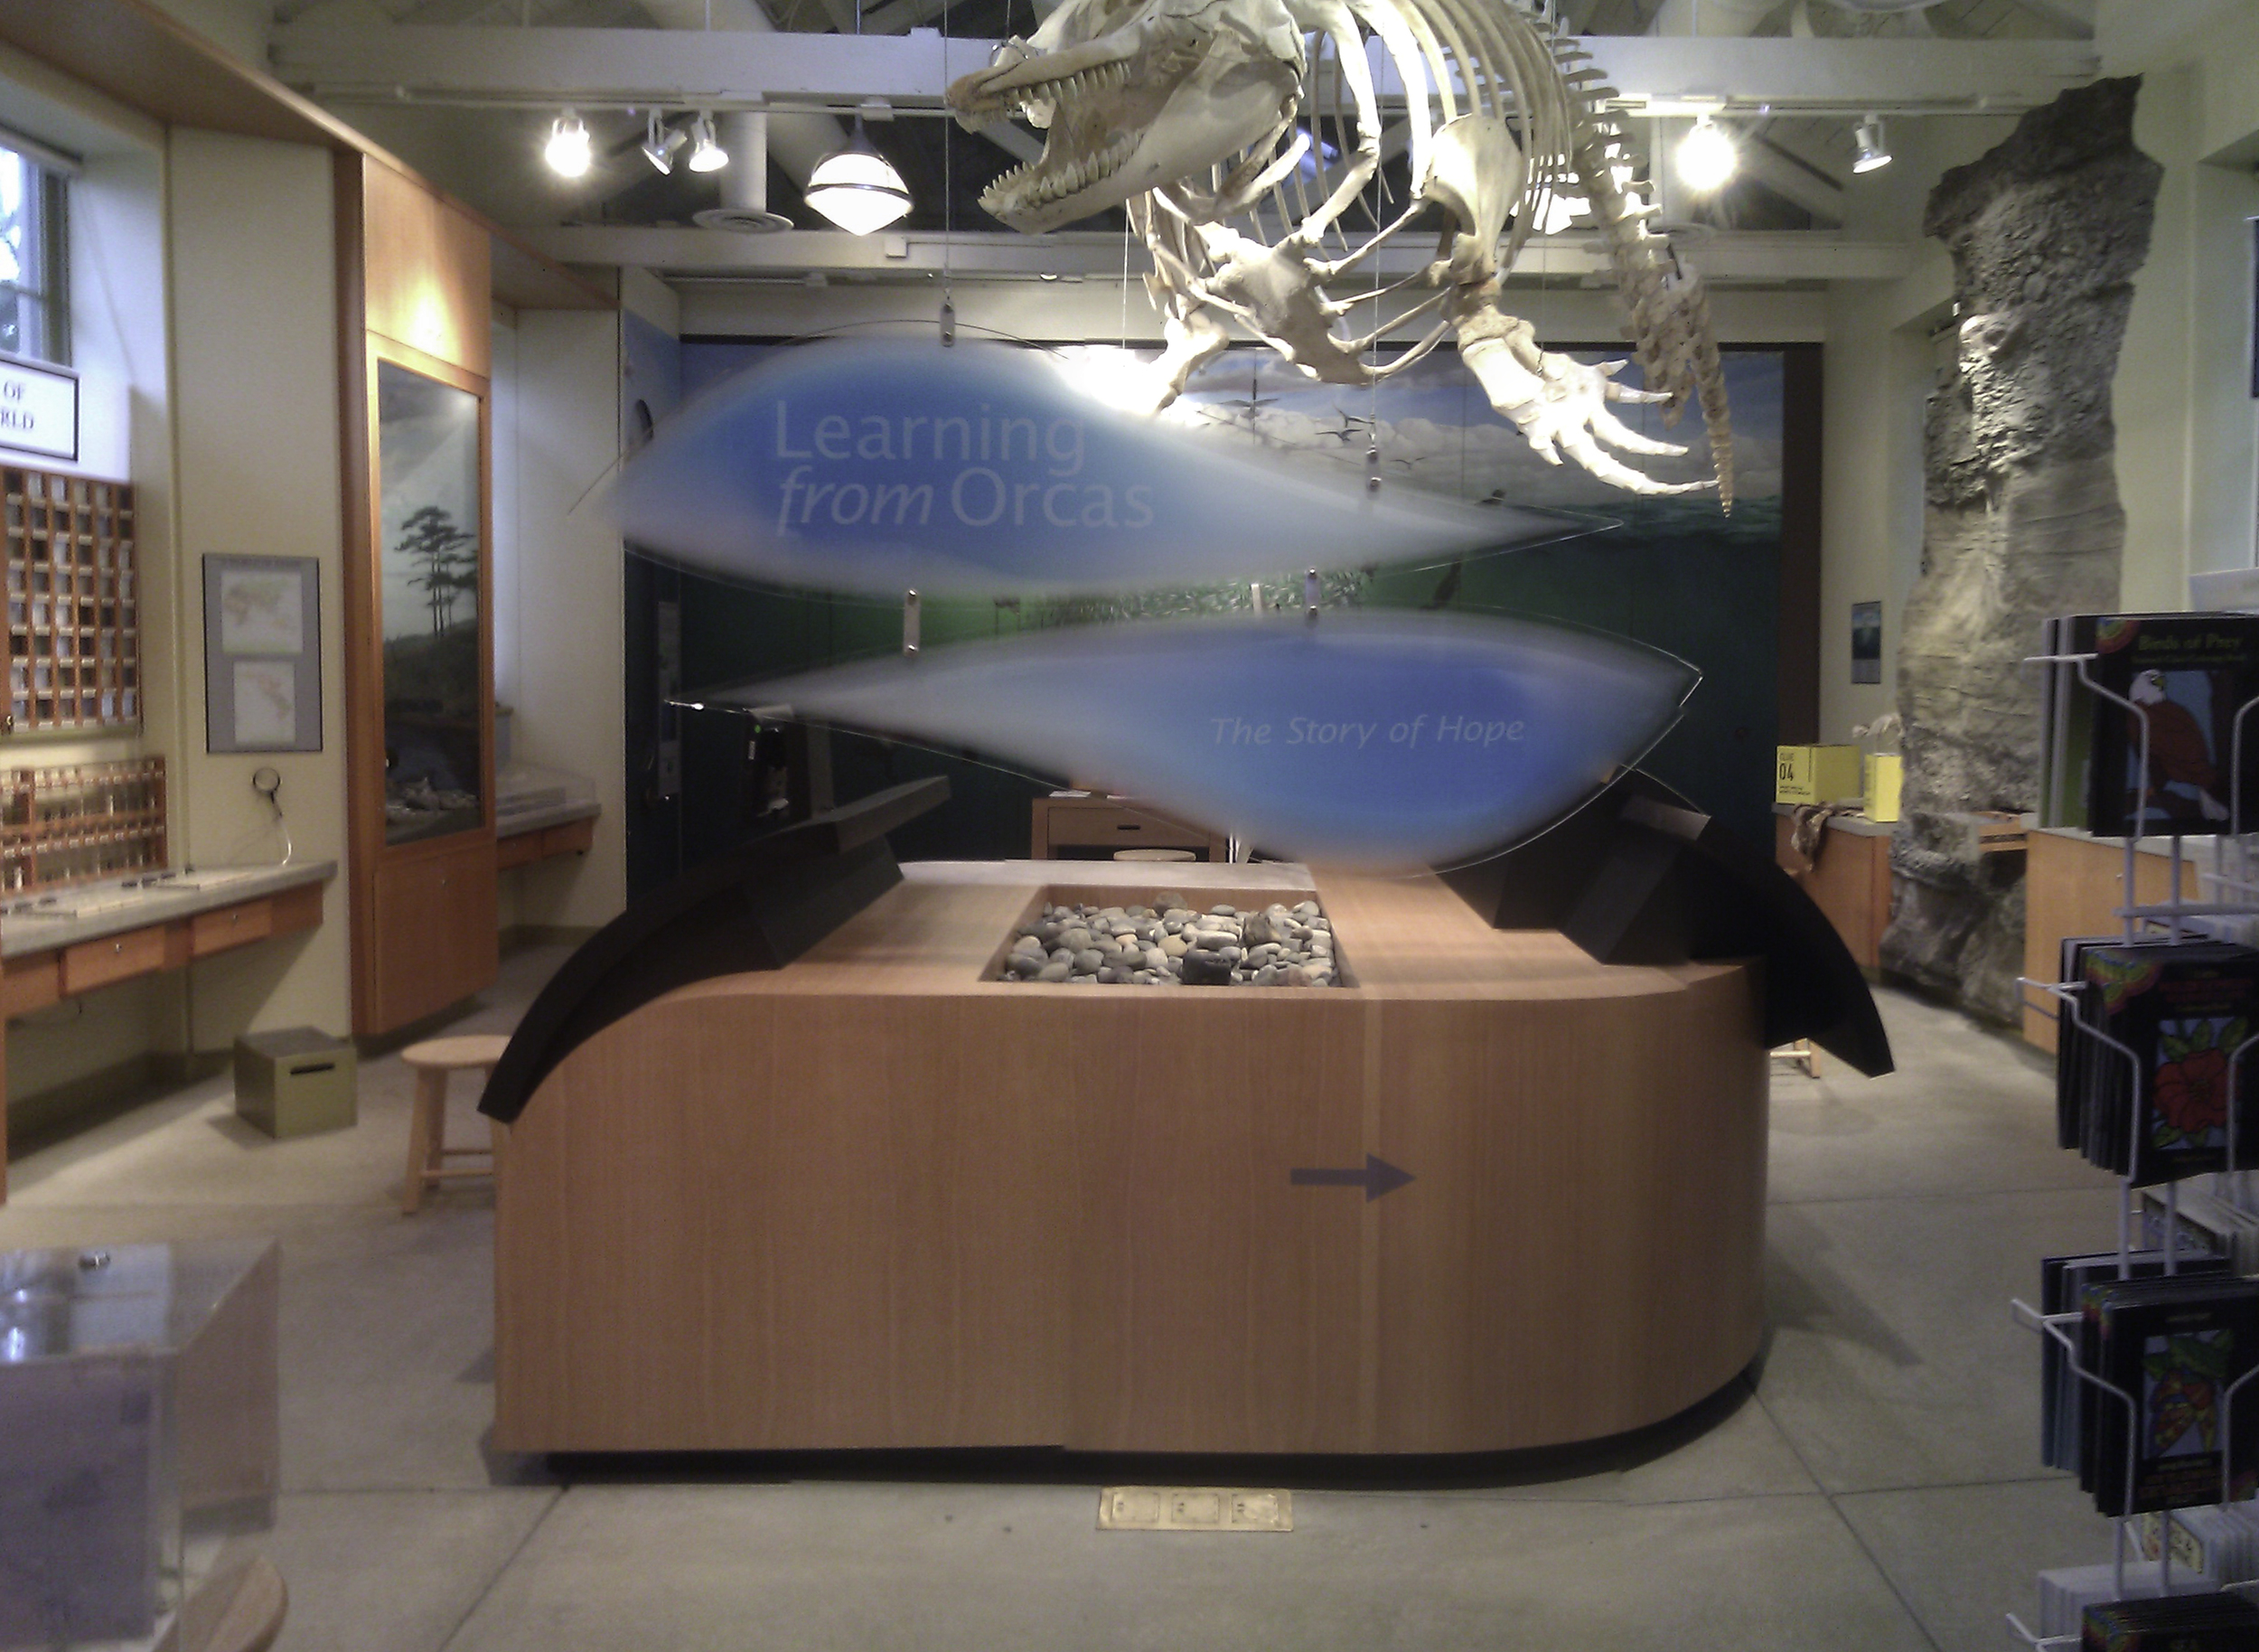  More photos are coming, but in the meantime, check out the Port Townsend Marine Science Center's&nbsp; site about the exhibit.   Client: Port Townsend Marine Science Center  3D Design: Brock Walker, Abbie Greene  Graphic Design: Brock Walker, Katie 